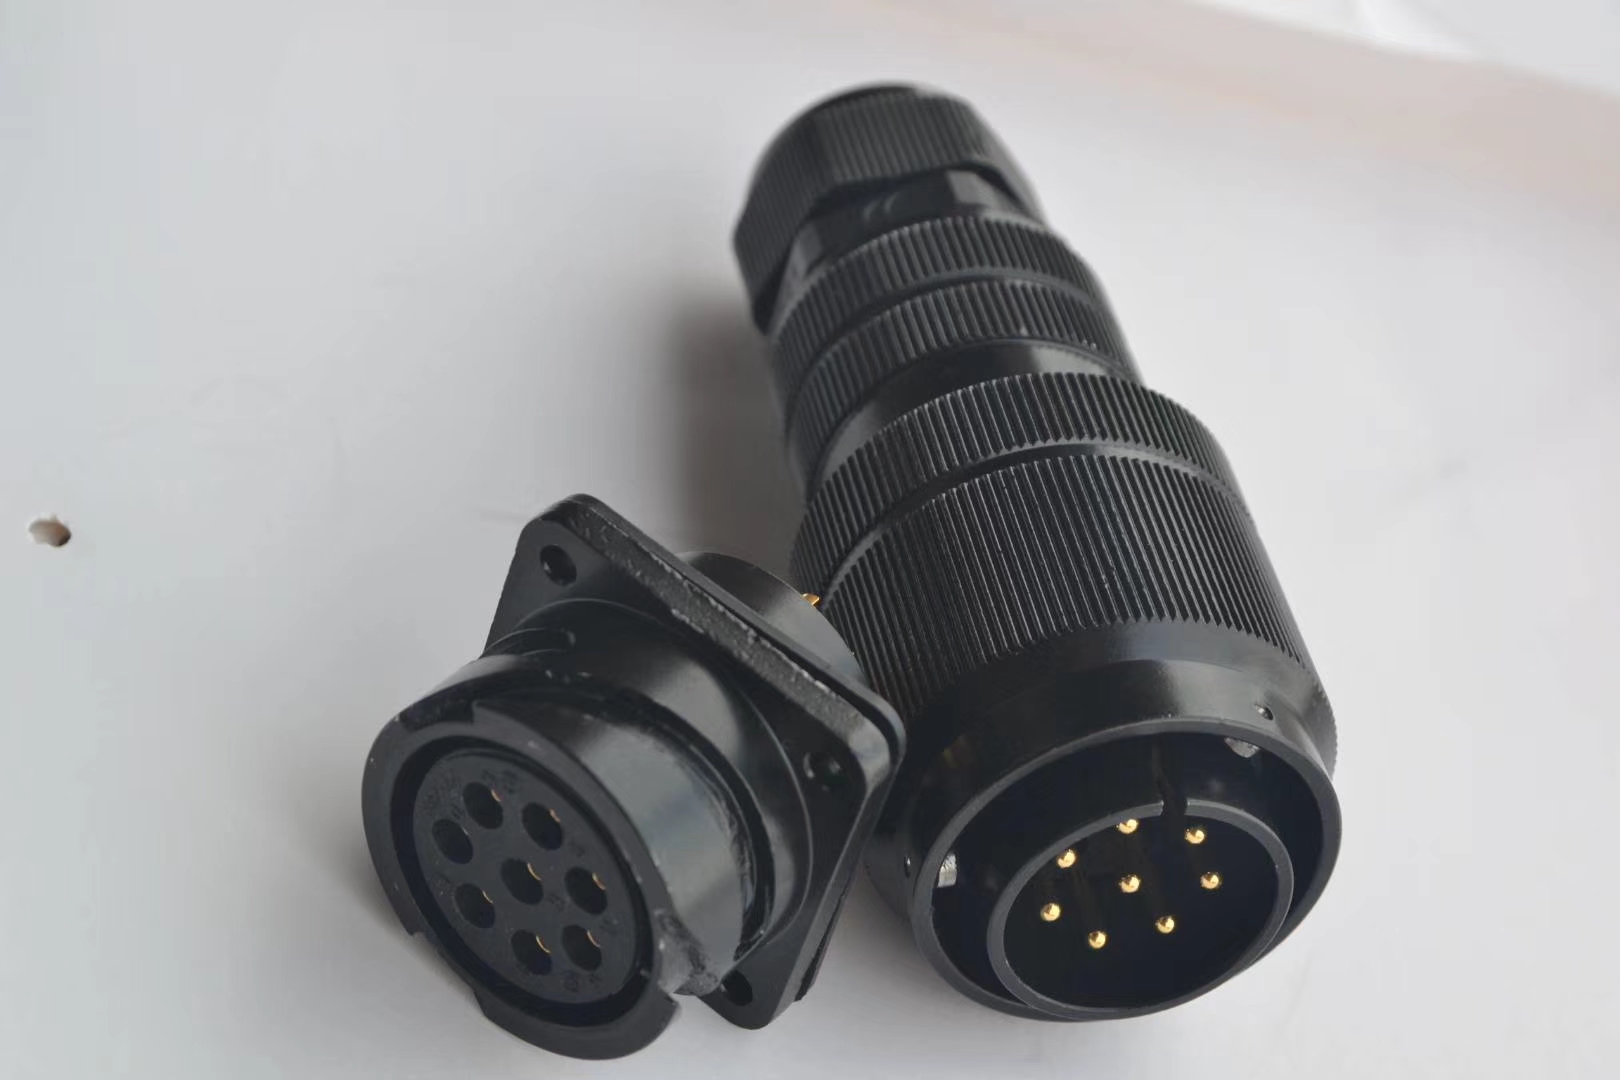 8 pin connector male